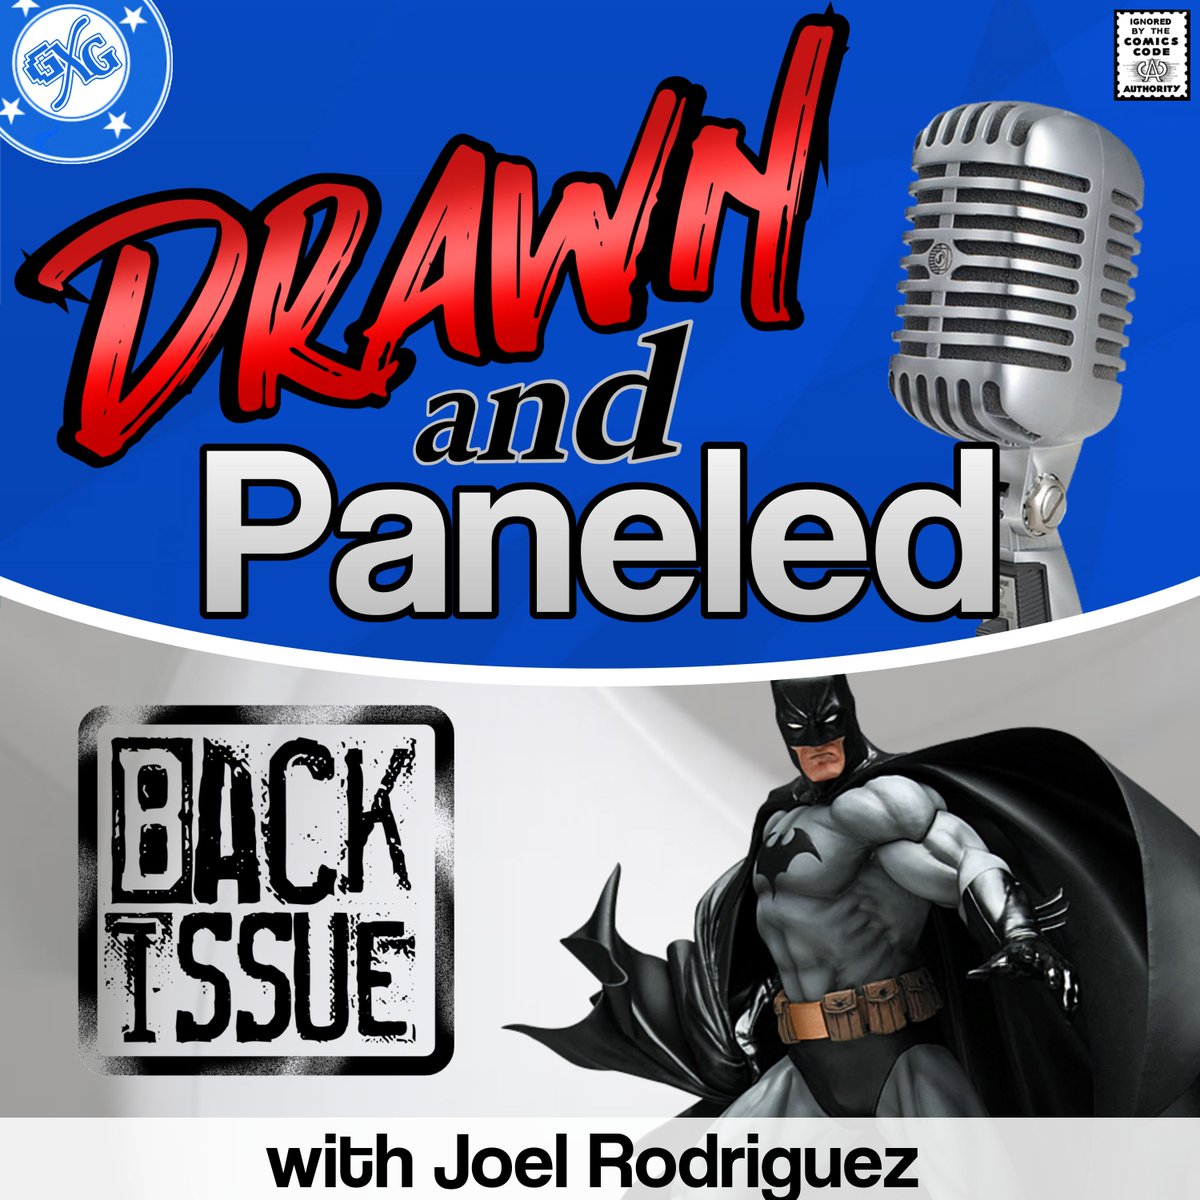 #NCBD #PodernFamily On today's podcast we welcome @J_Rod_Comics from @MNinjaStudios to discuss Batman: Year 1 from @DCComics and @FrankMillerInk Check it out » genxgrownup.com/dp-backissue-b…